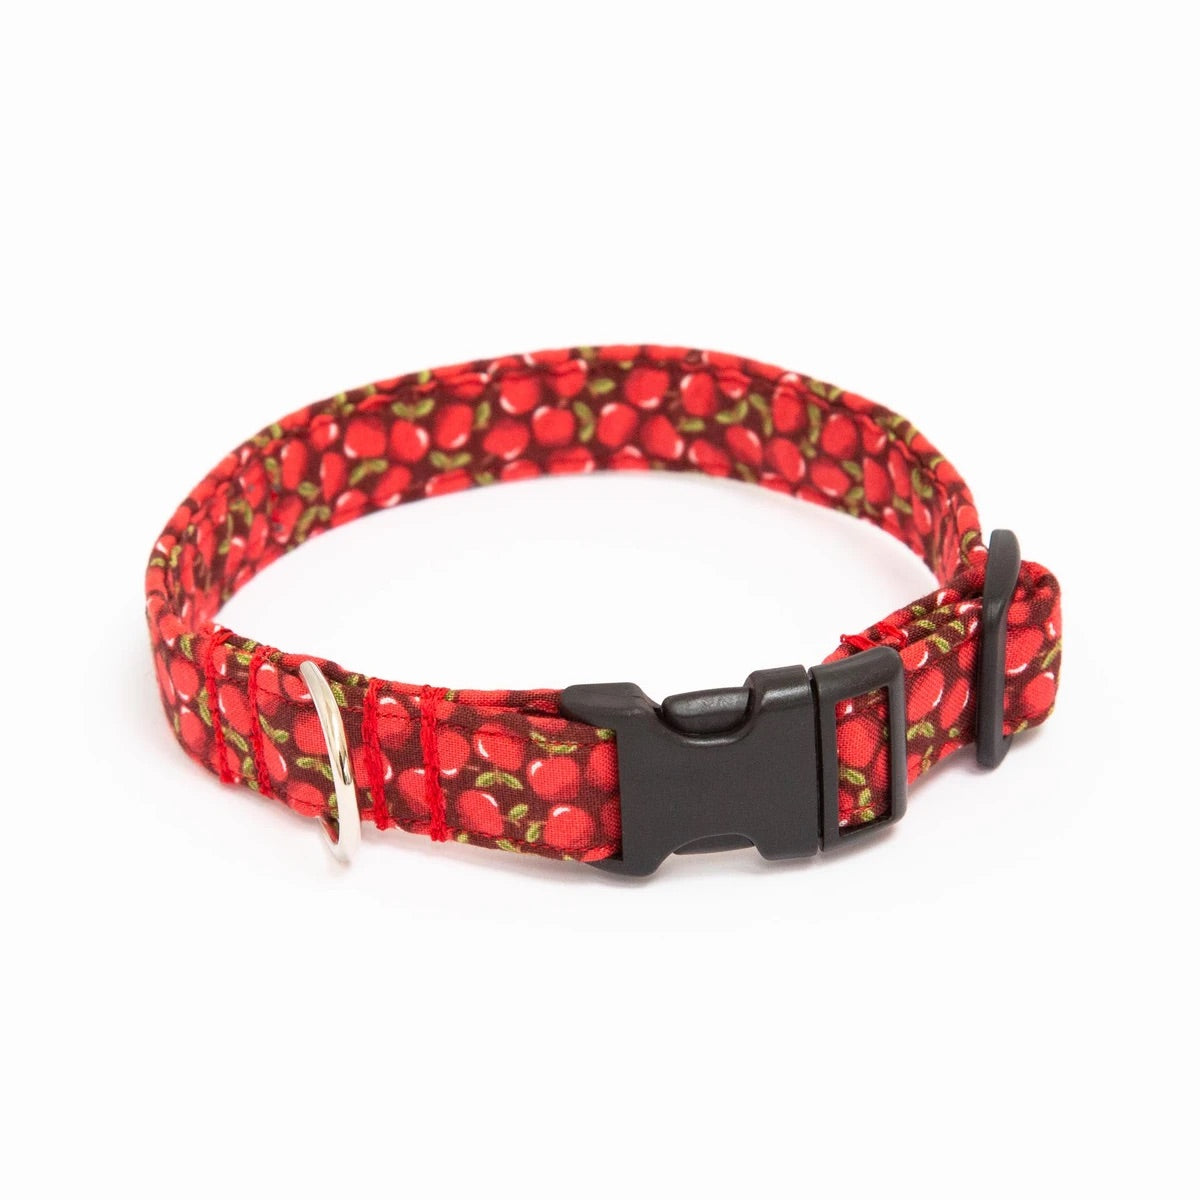 Handcrafted dog collar by Wiff Waff Designs with red apple print fabric